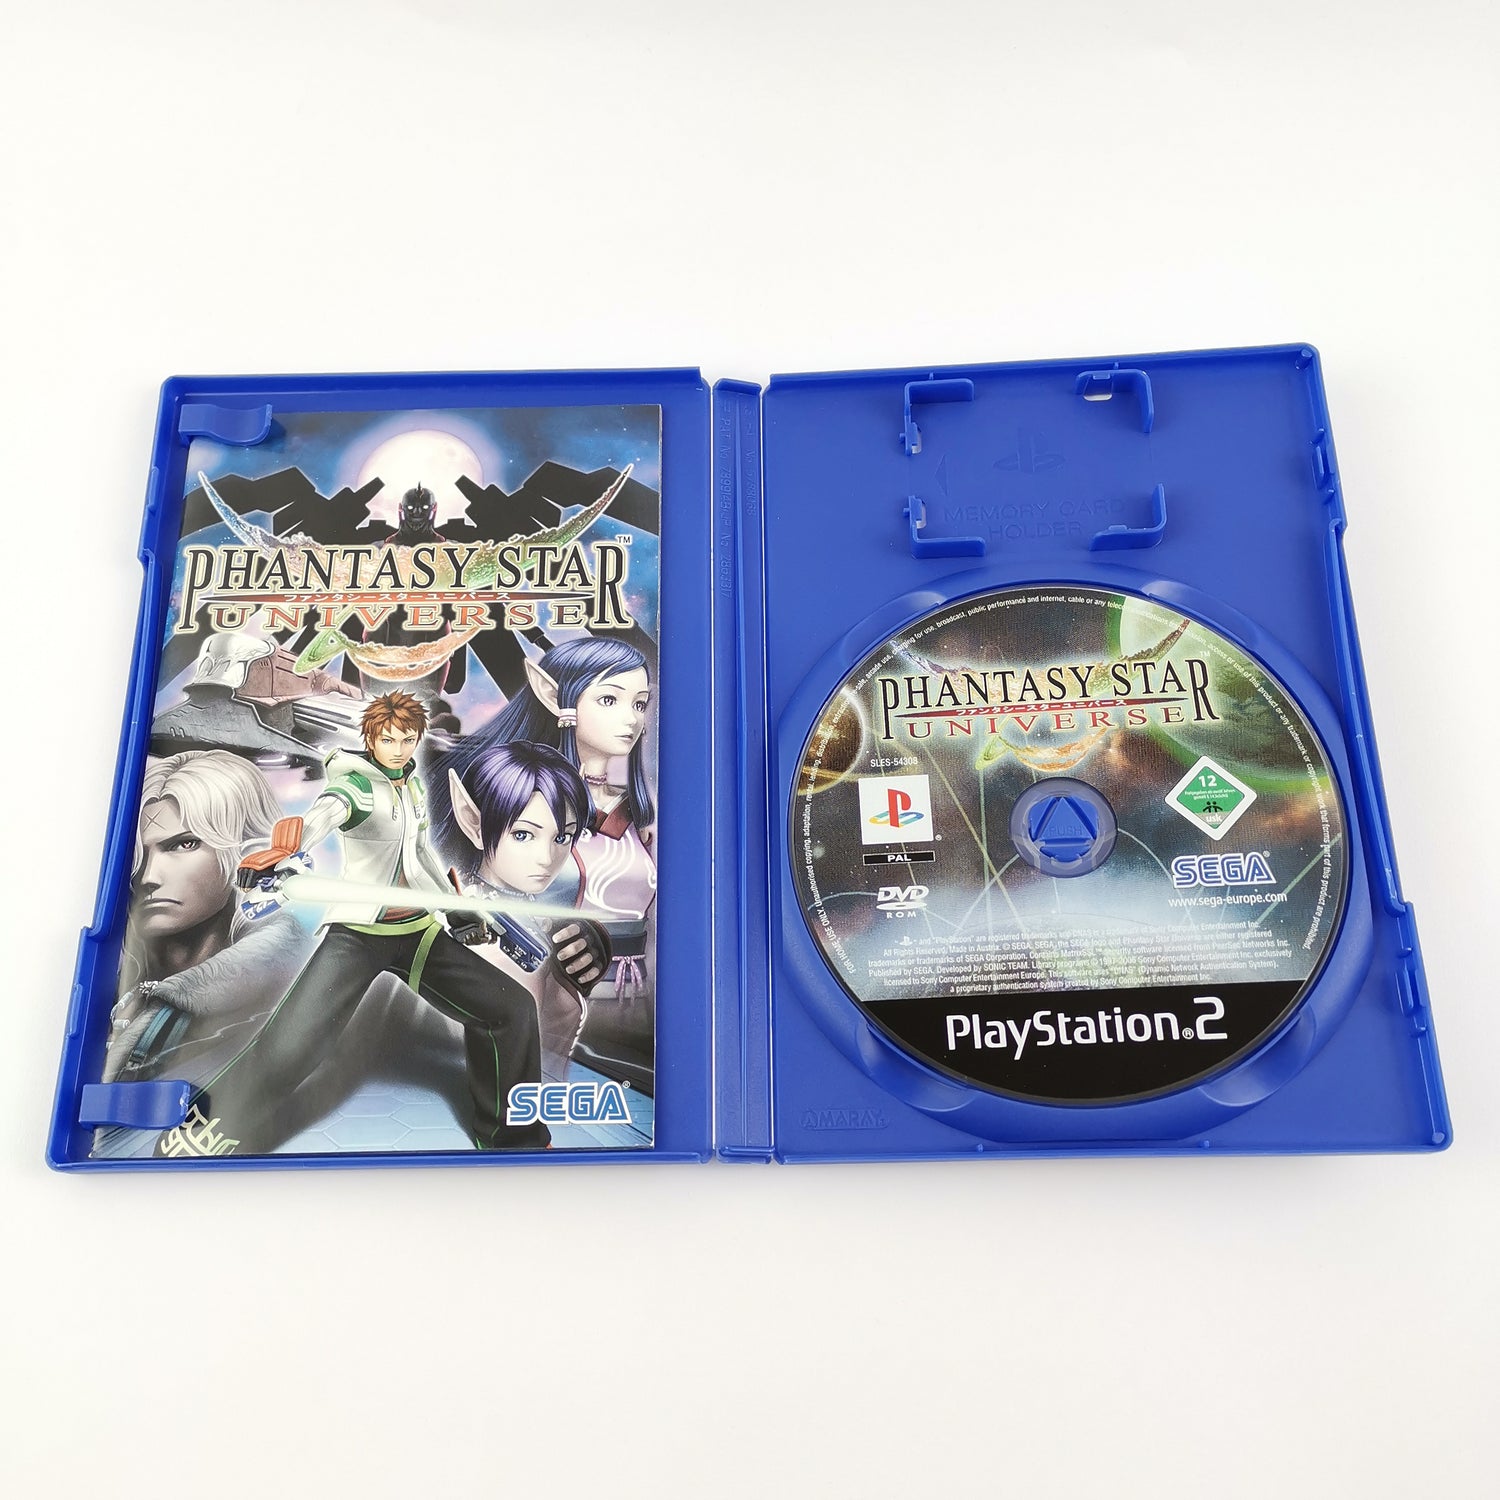 Sony Playstation 2 Game: Phantasy Star Universe + Strategy Guide | PS2 original packaging USA